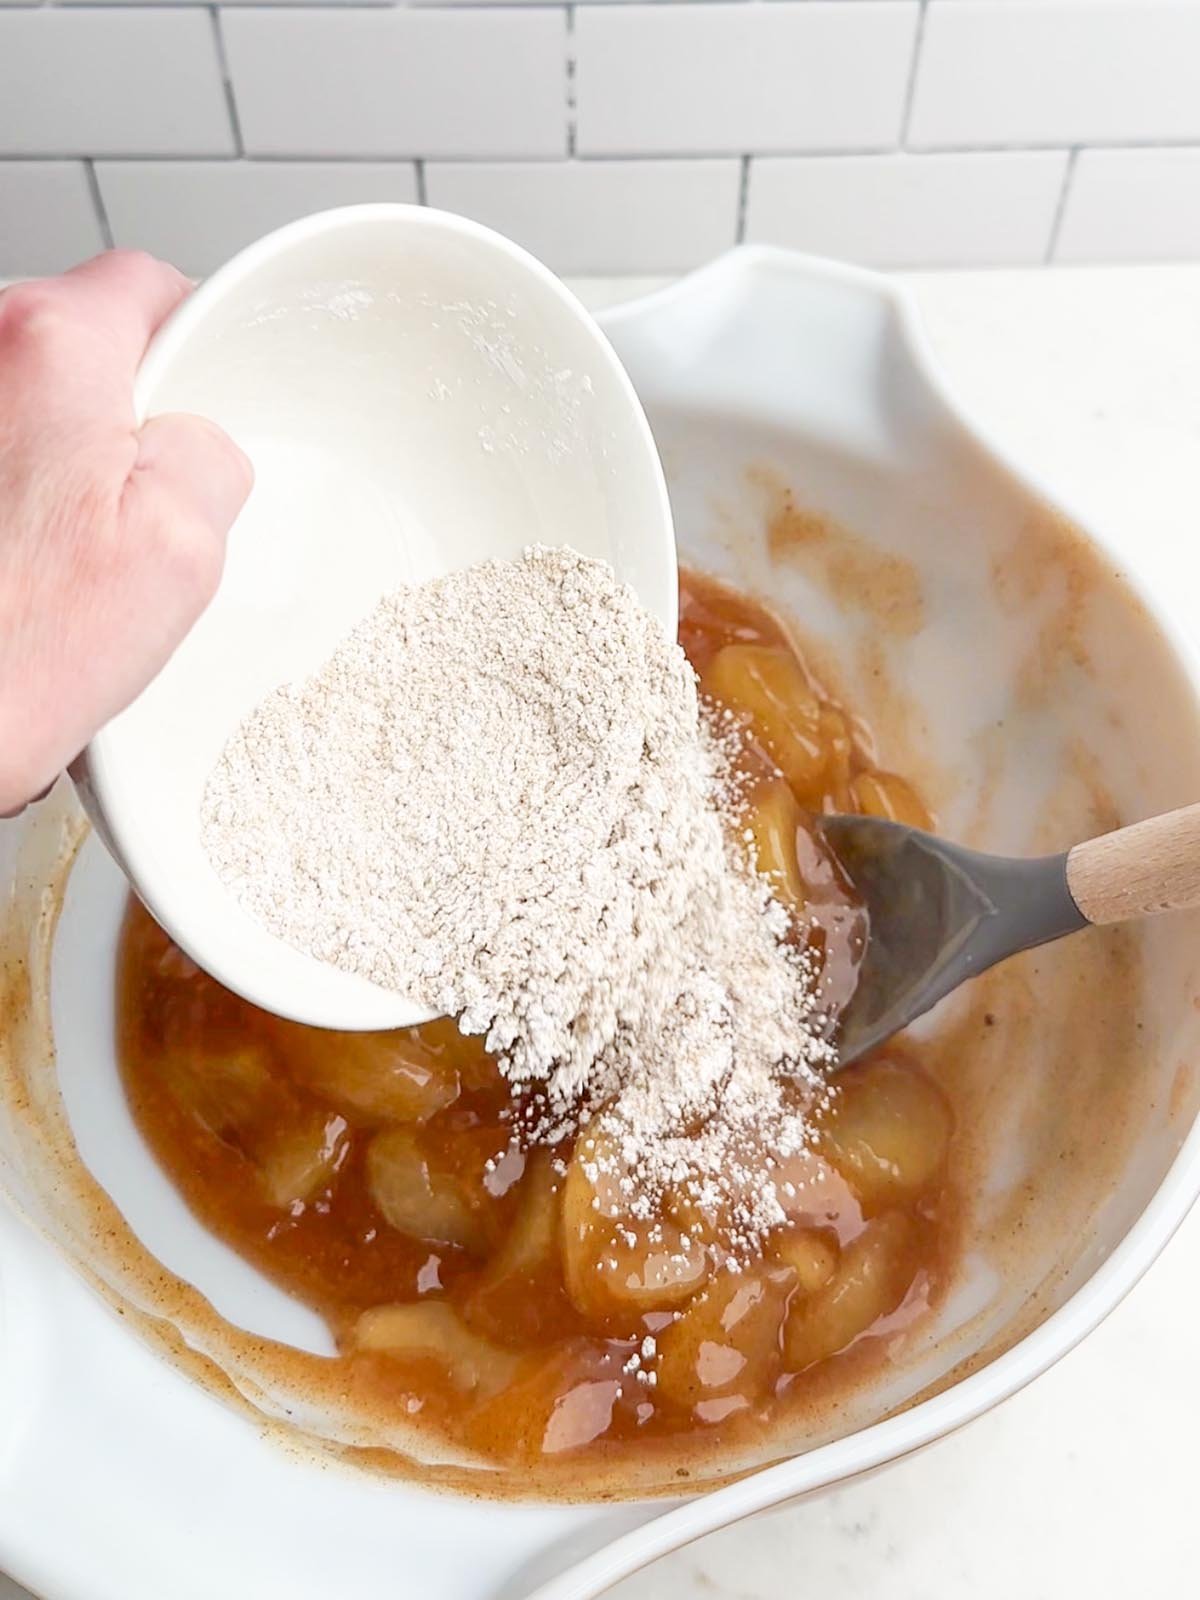 Hand pouring a bowl of cornstarch and brown sugar into apple pie filling.